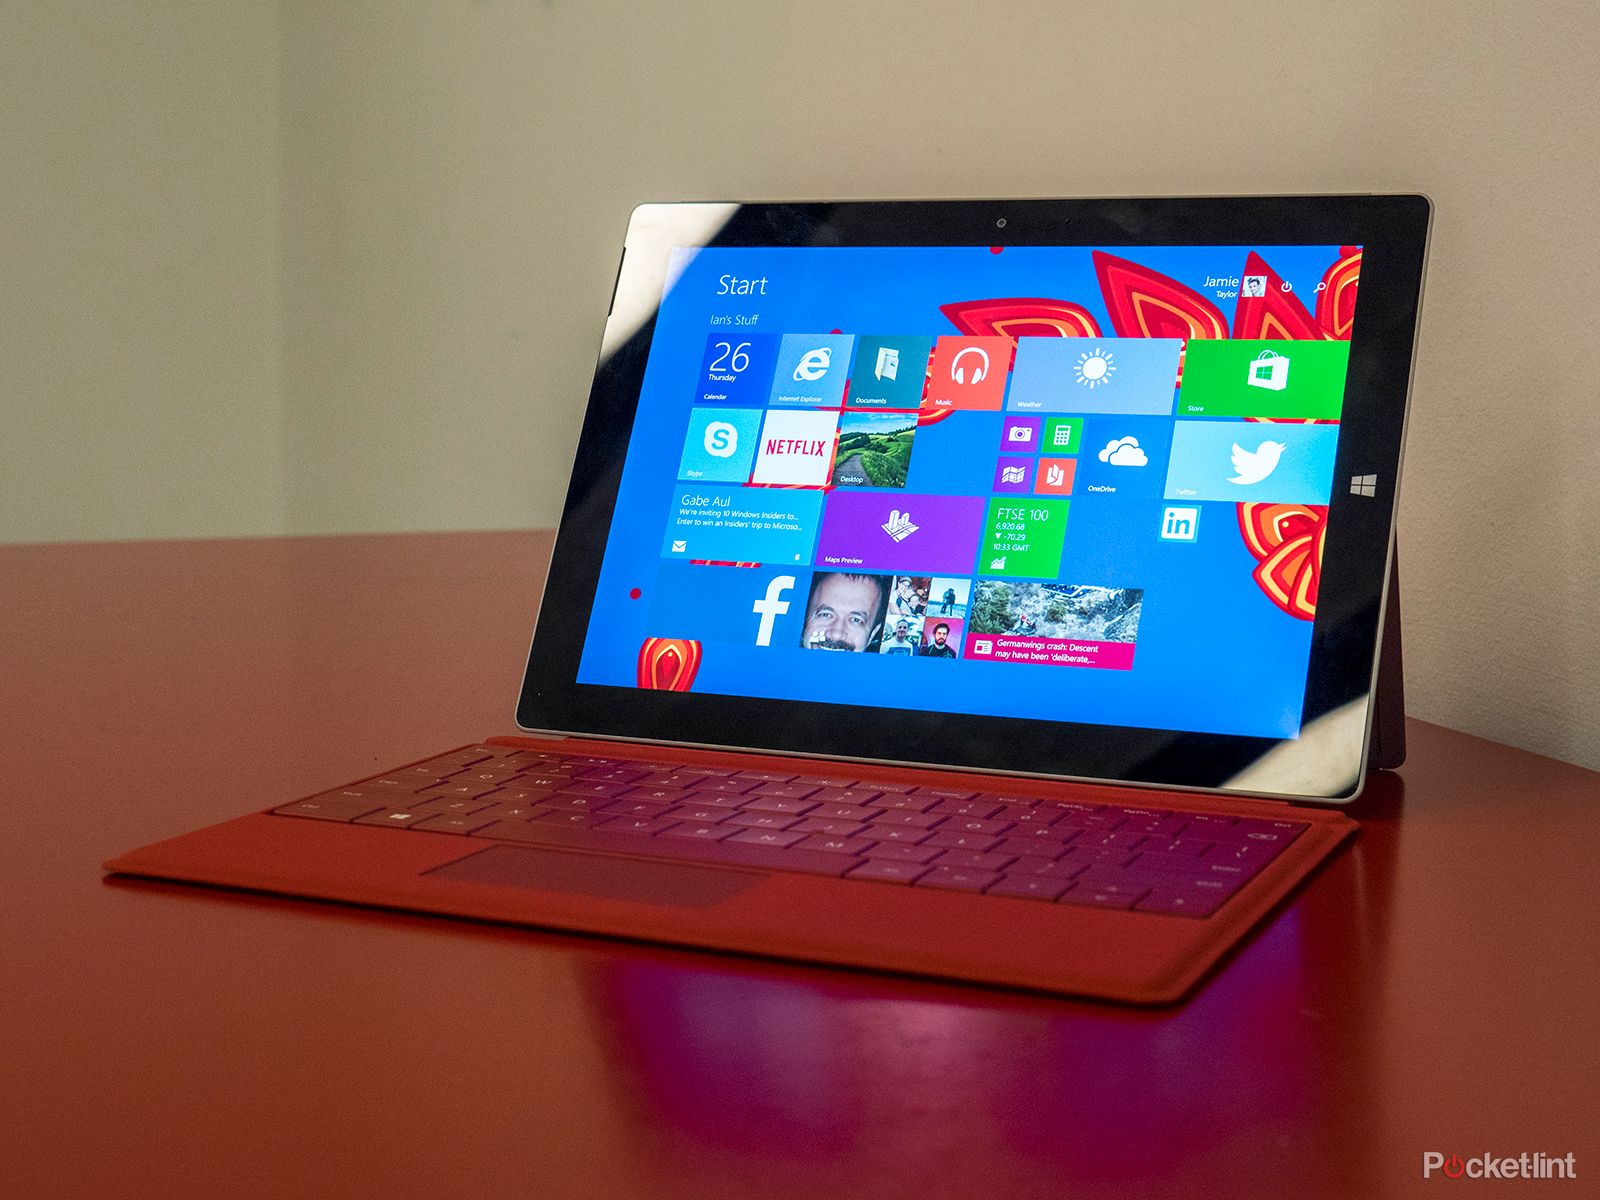 microsoft surface 3 10 8 inch hd screen full windows 8 1 50 cheaper than the pro 3 hands on  image 1